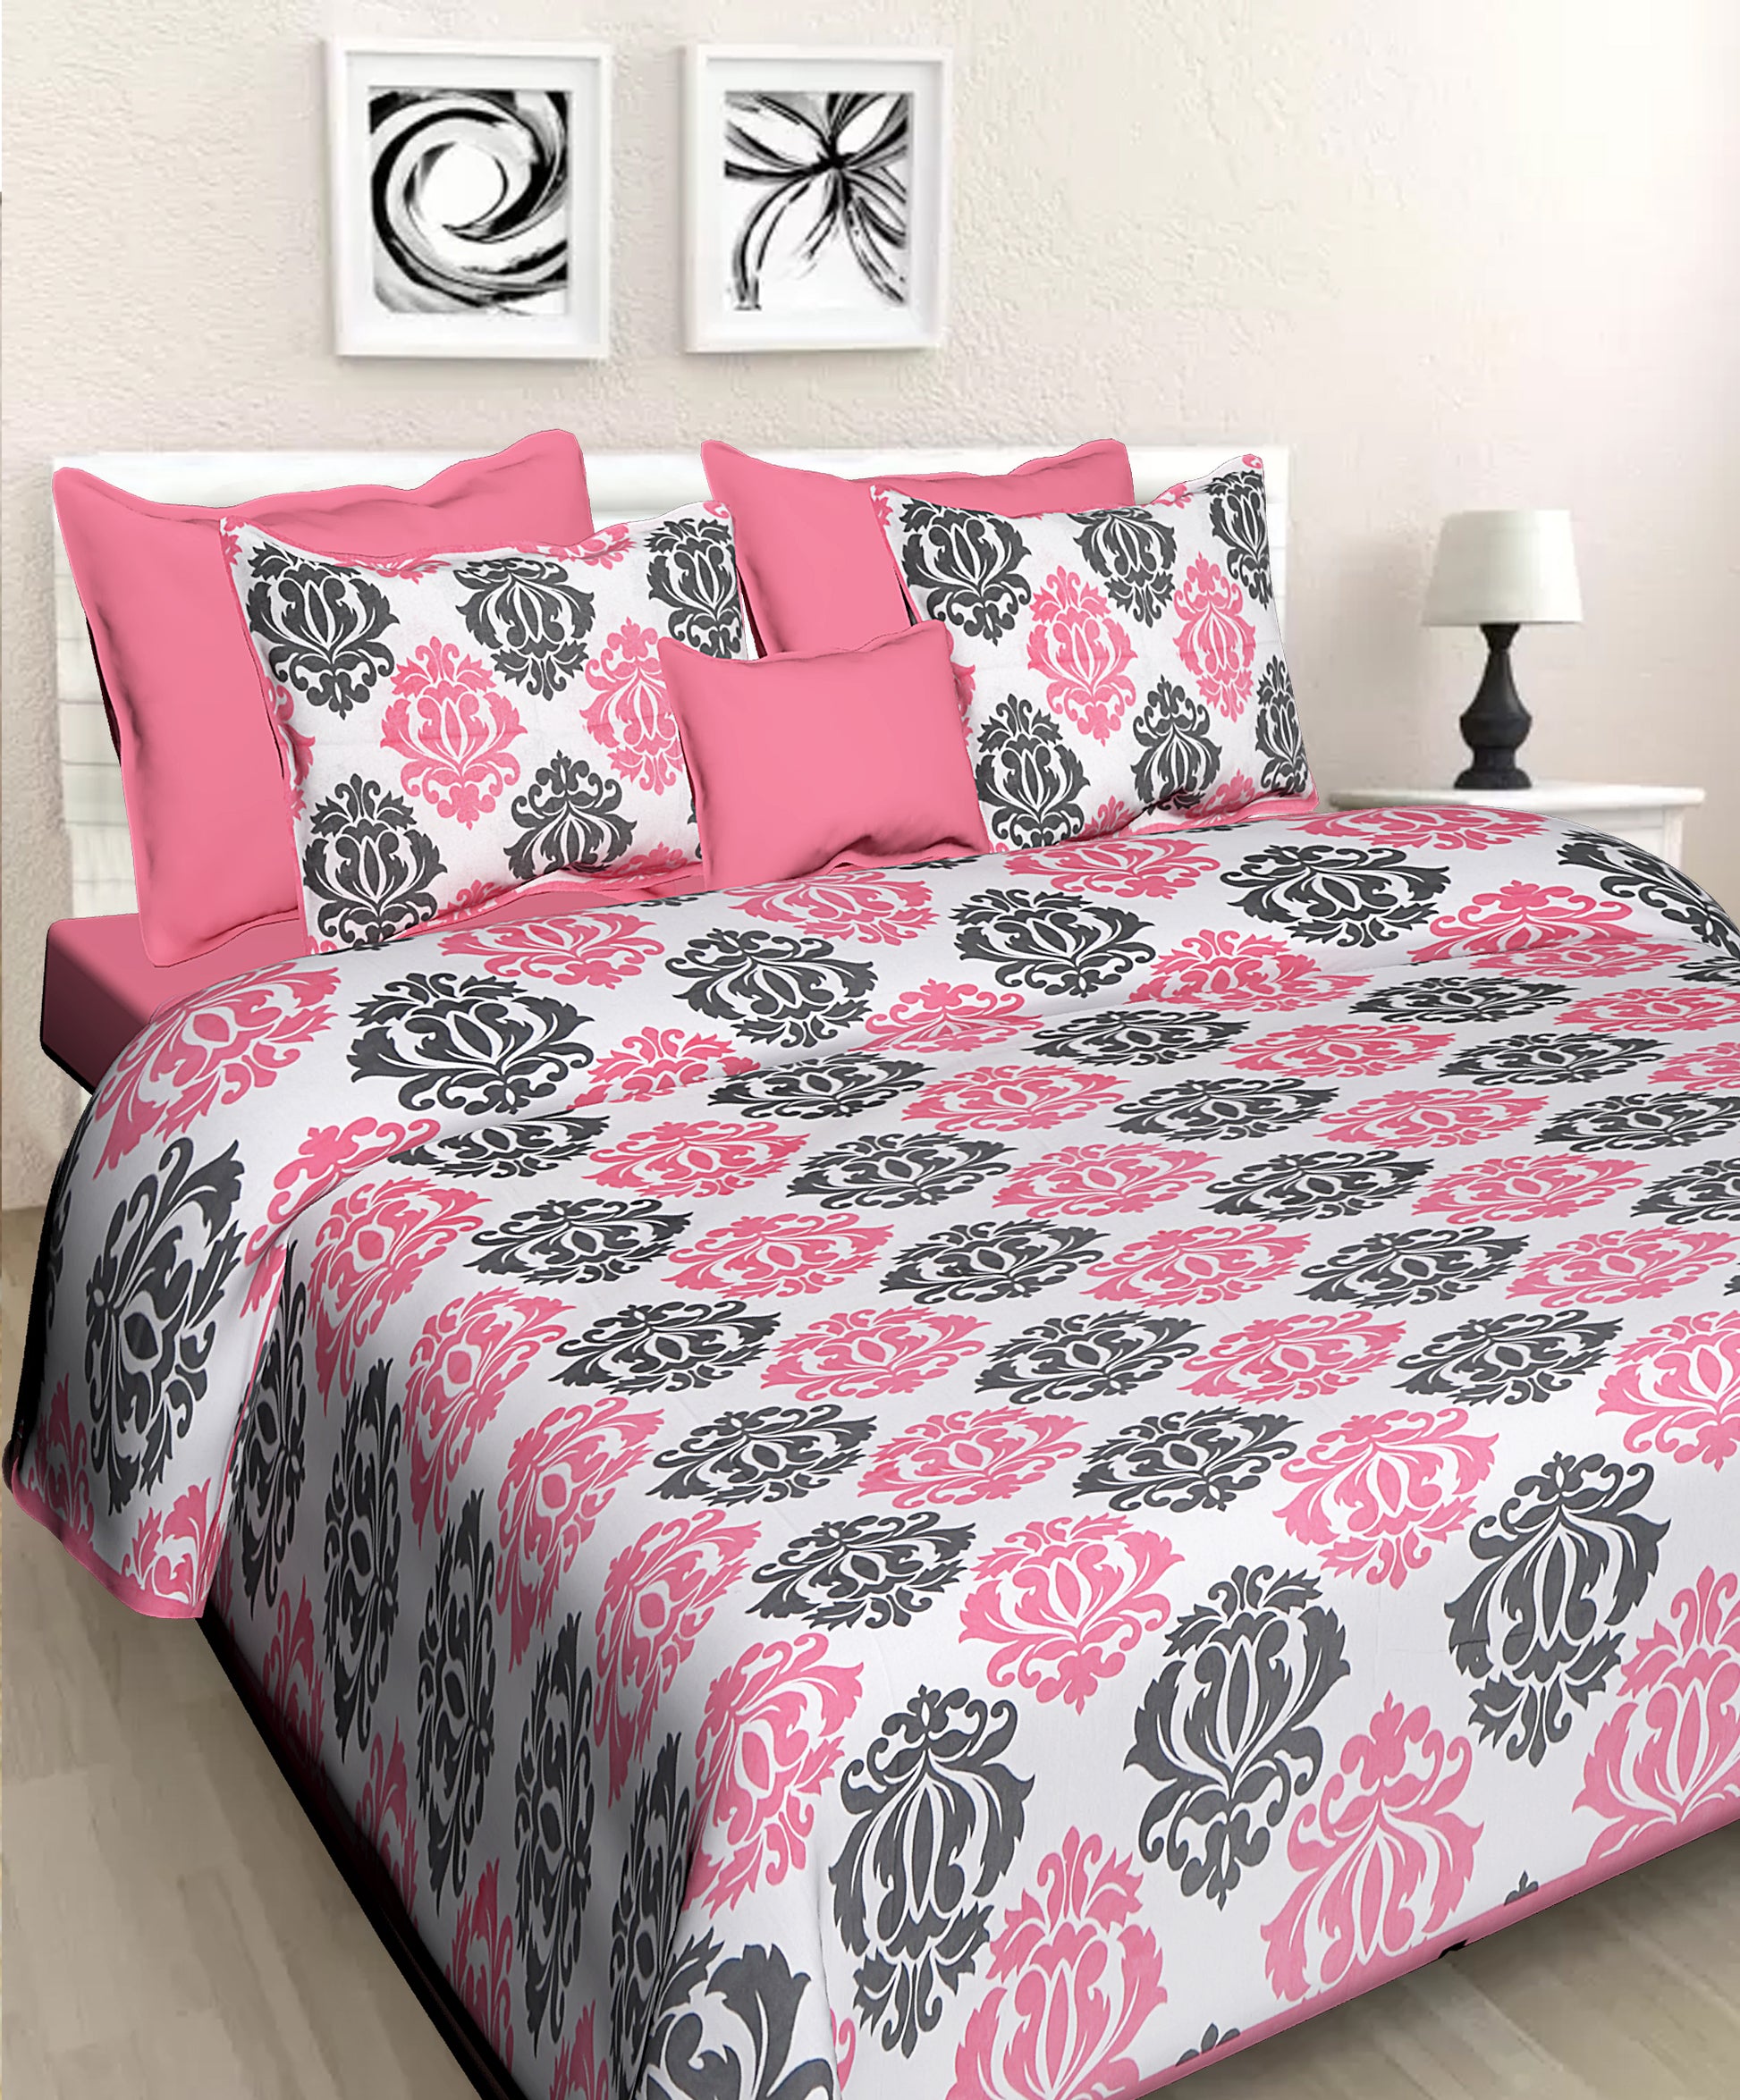 Jaipuriya Hand Block Chhapai  Bedsheet For Double Bed  With 2 Pillow Cover - Colour Pink , Fabric - 100% Cotton JAIPUR PRINTS